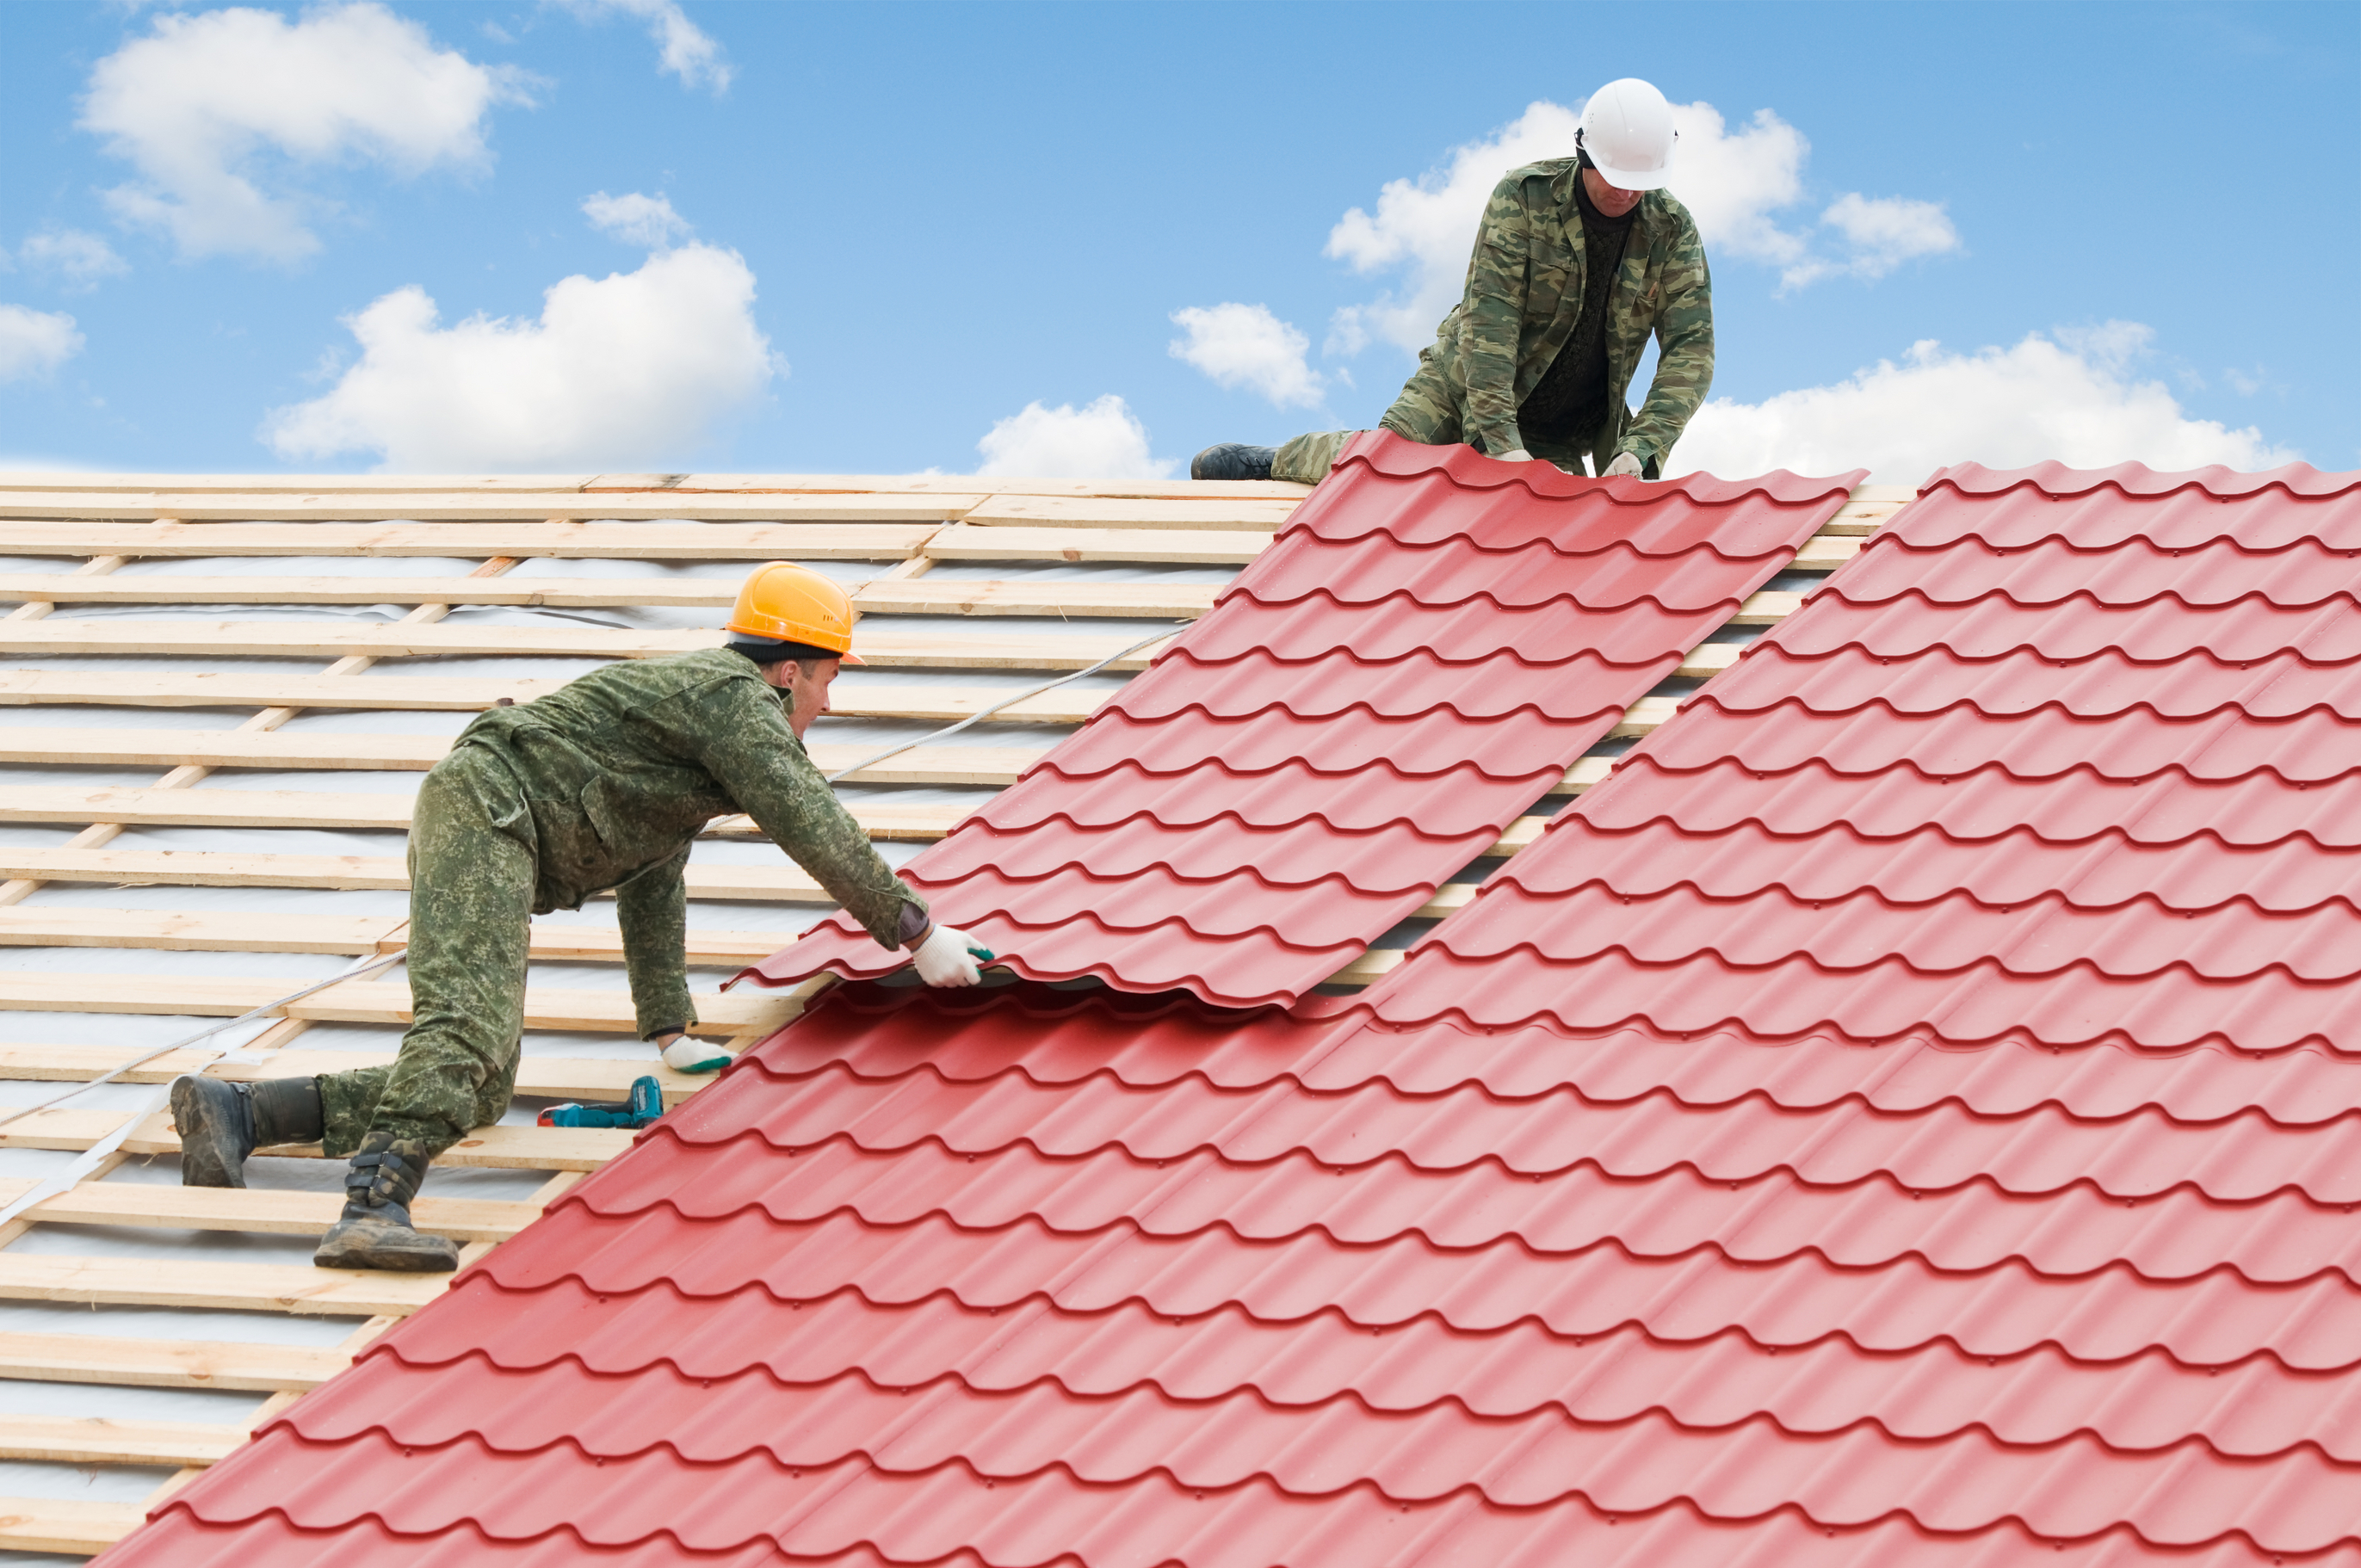 Excellent Advice If You Find Yourself On The Lookout For A Brand New Roof 1